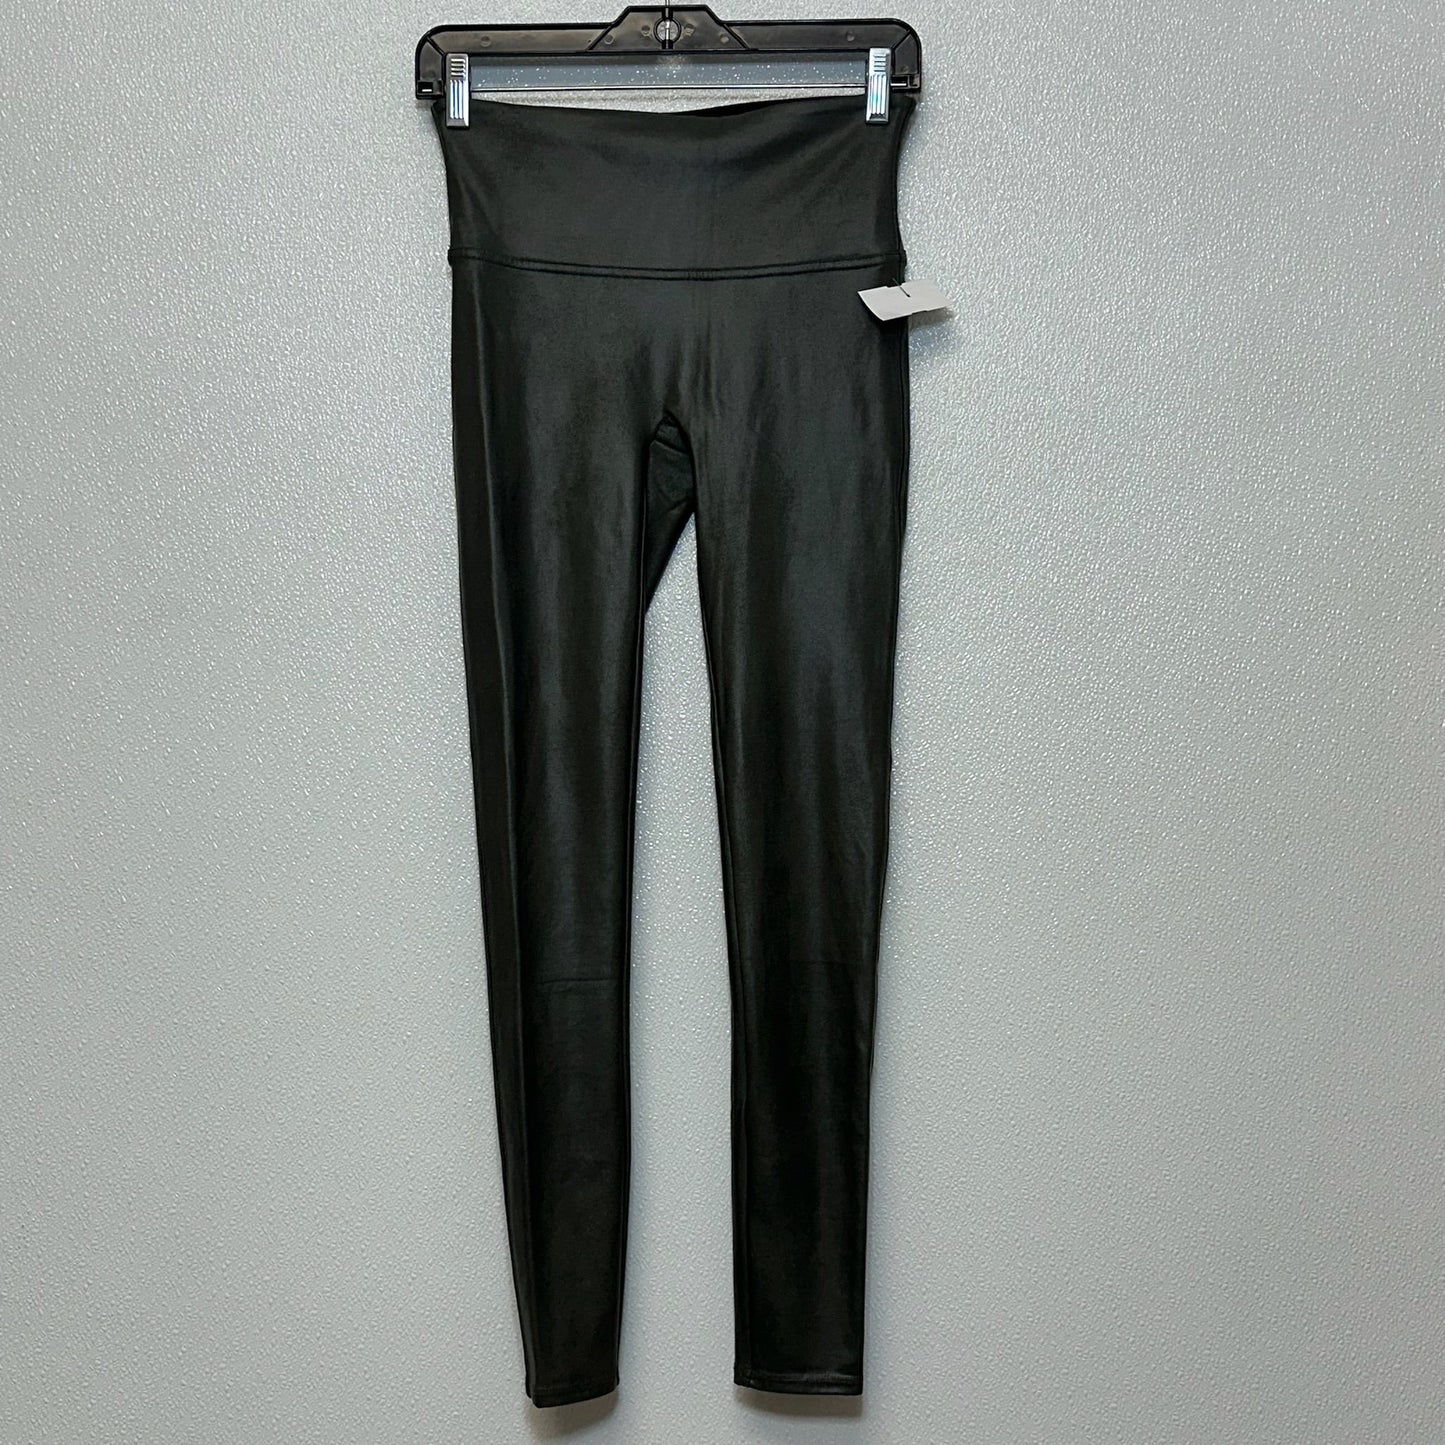 Leggings By Spanx  Size: M